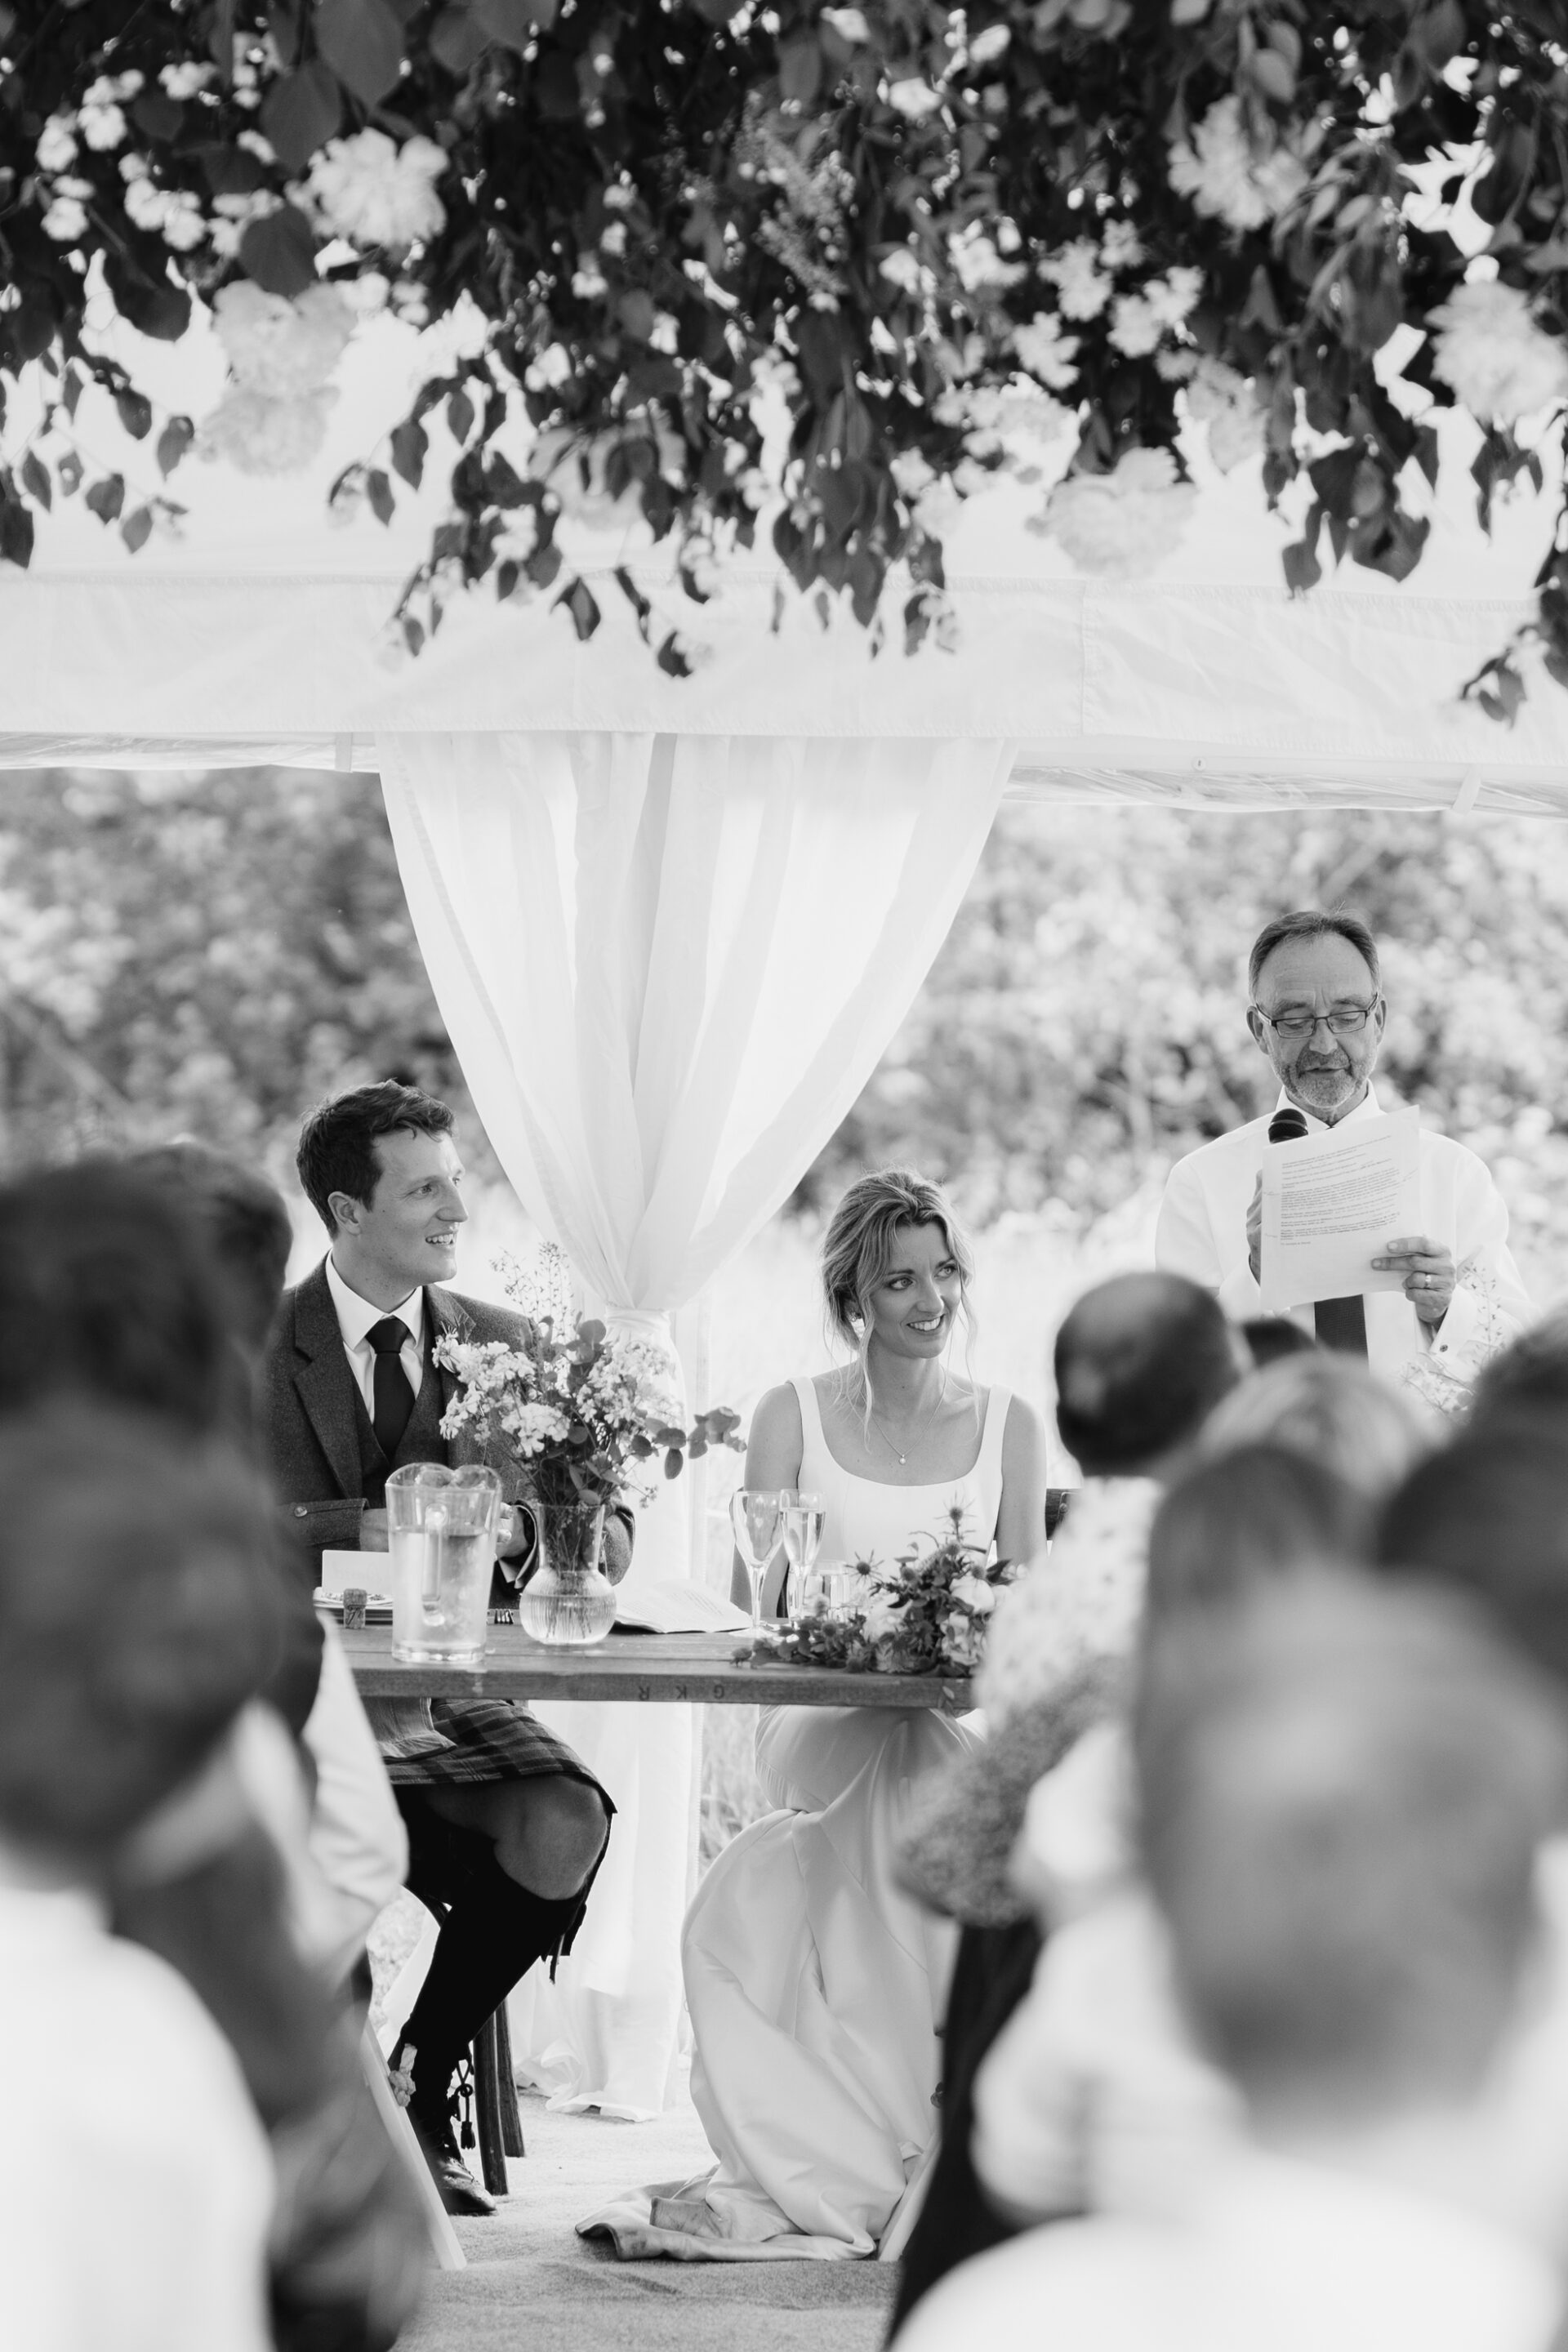 The bride and groom listen to the father of the bride's speech at a Devon marquee wedding